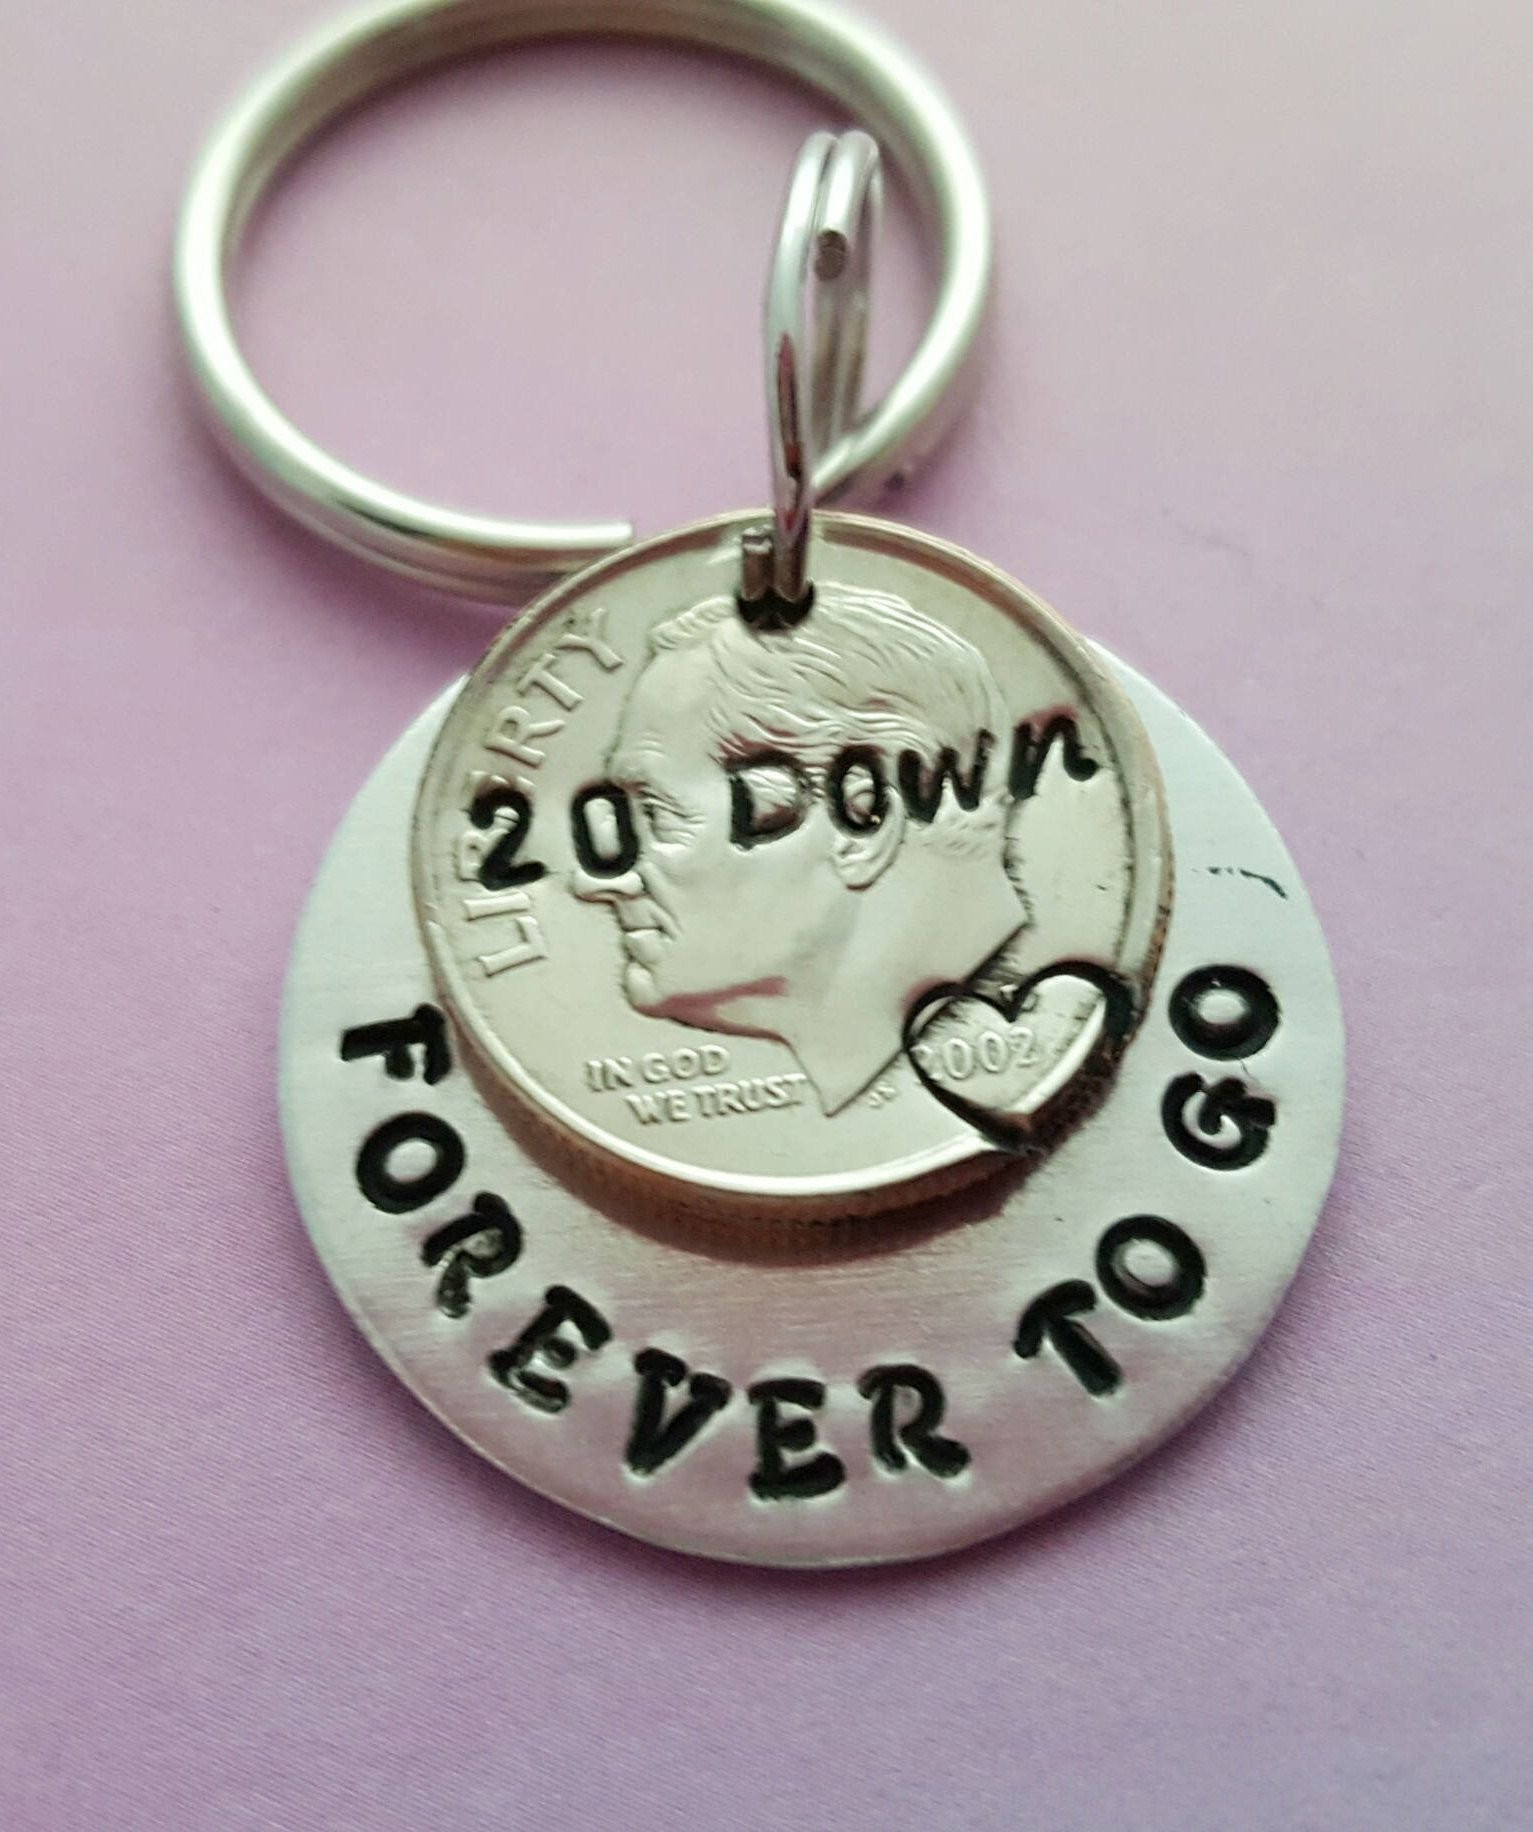 20Th Anniversary Gift Ideas For Her
 10 Lovable Ideas For 20Th Wedding Anniversary 2020